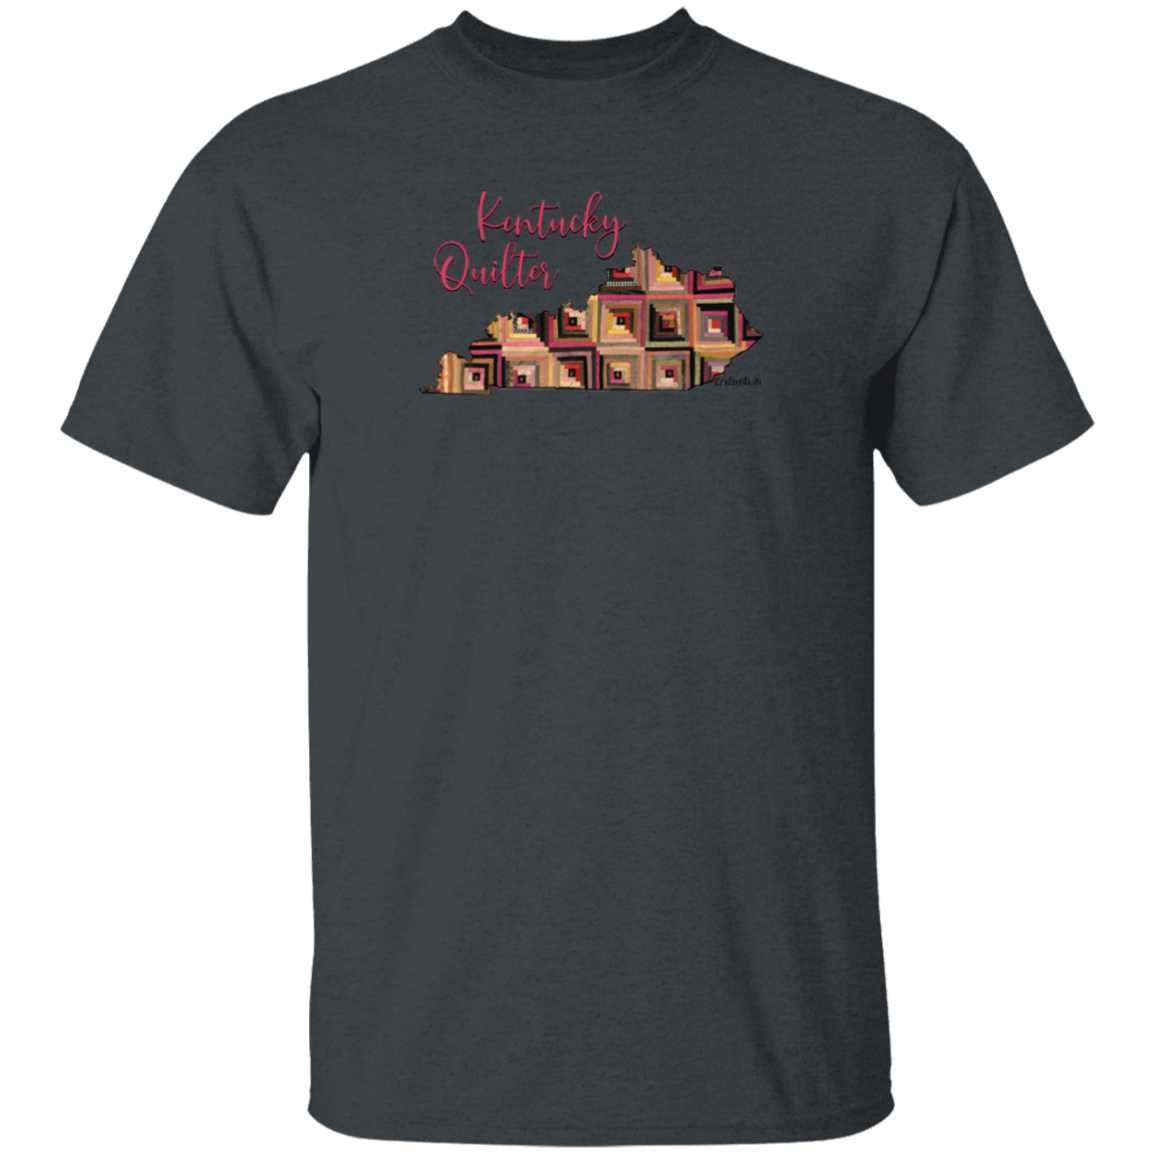 Kentucky Quilter T-Shirt, Gift for Quilting Friends and Family